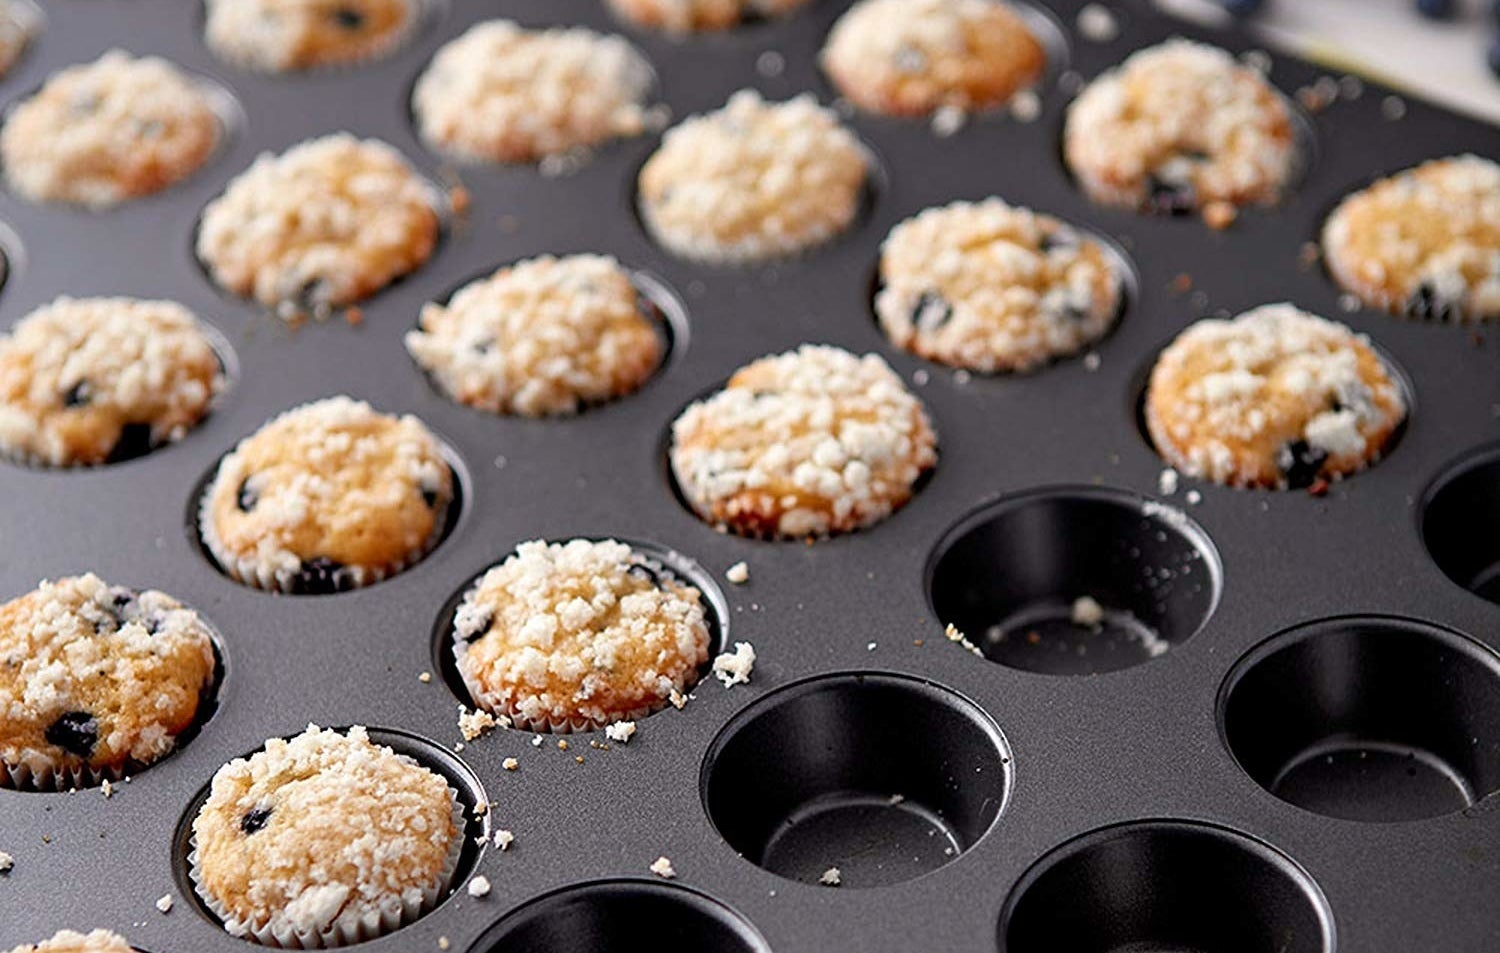 The mini muffin tin with baked muffins in it